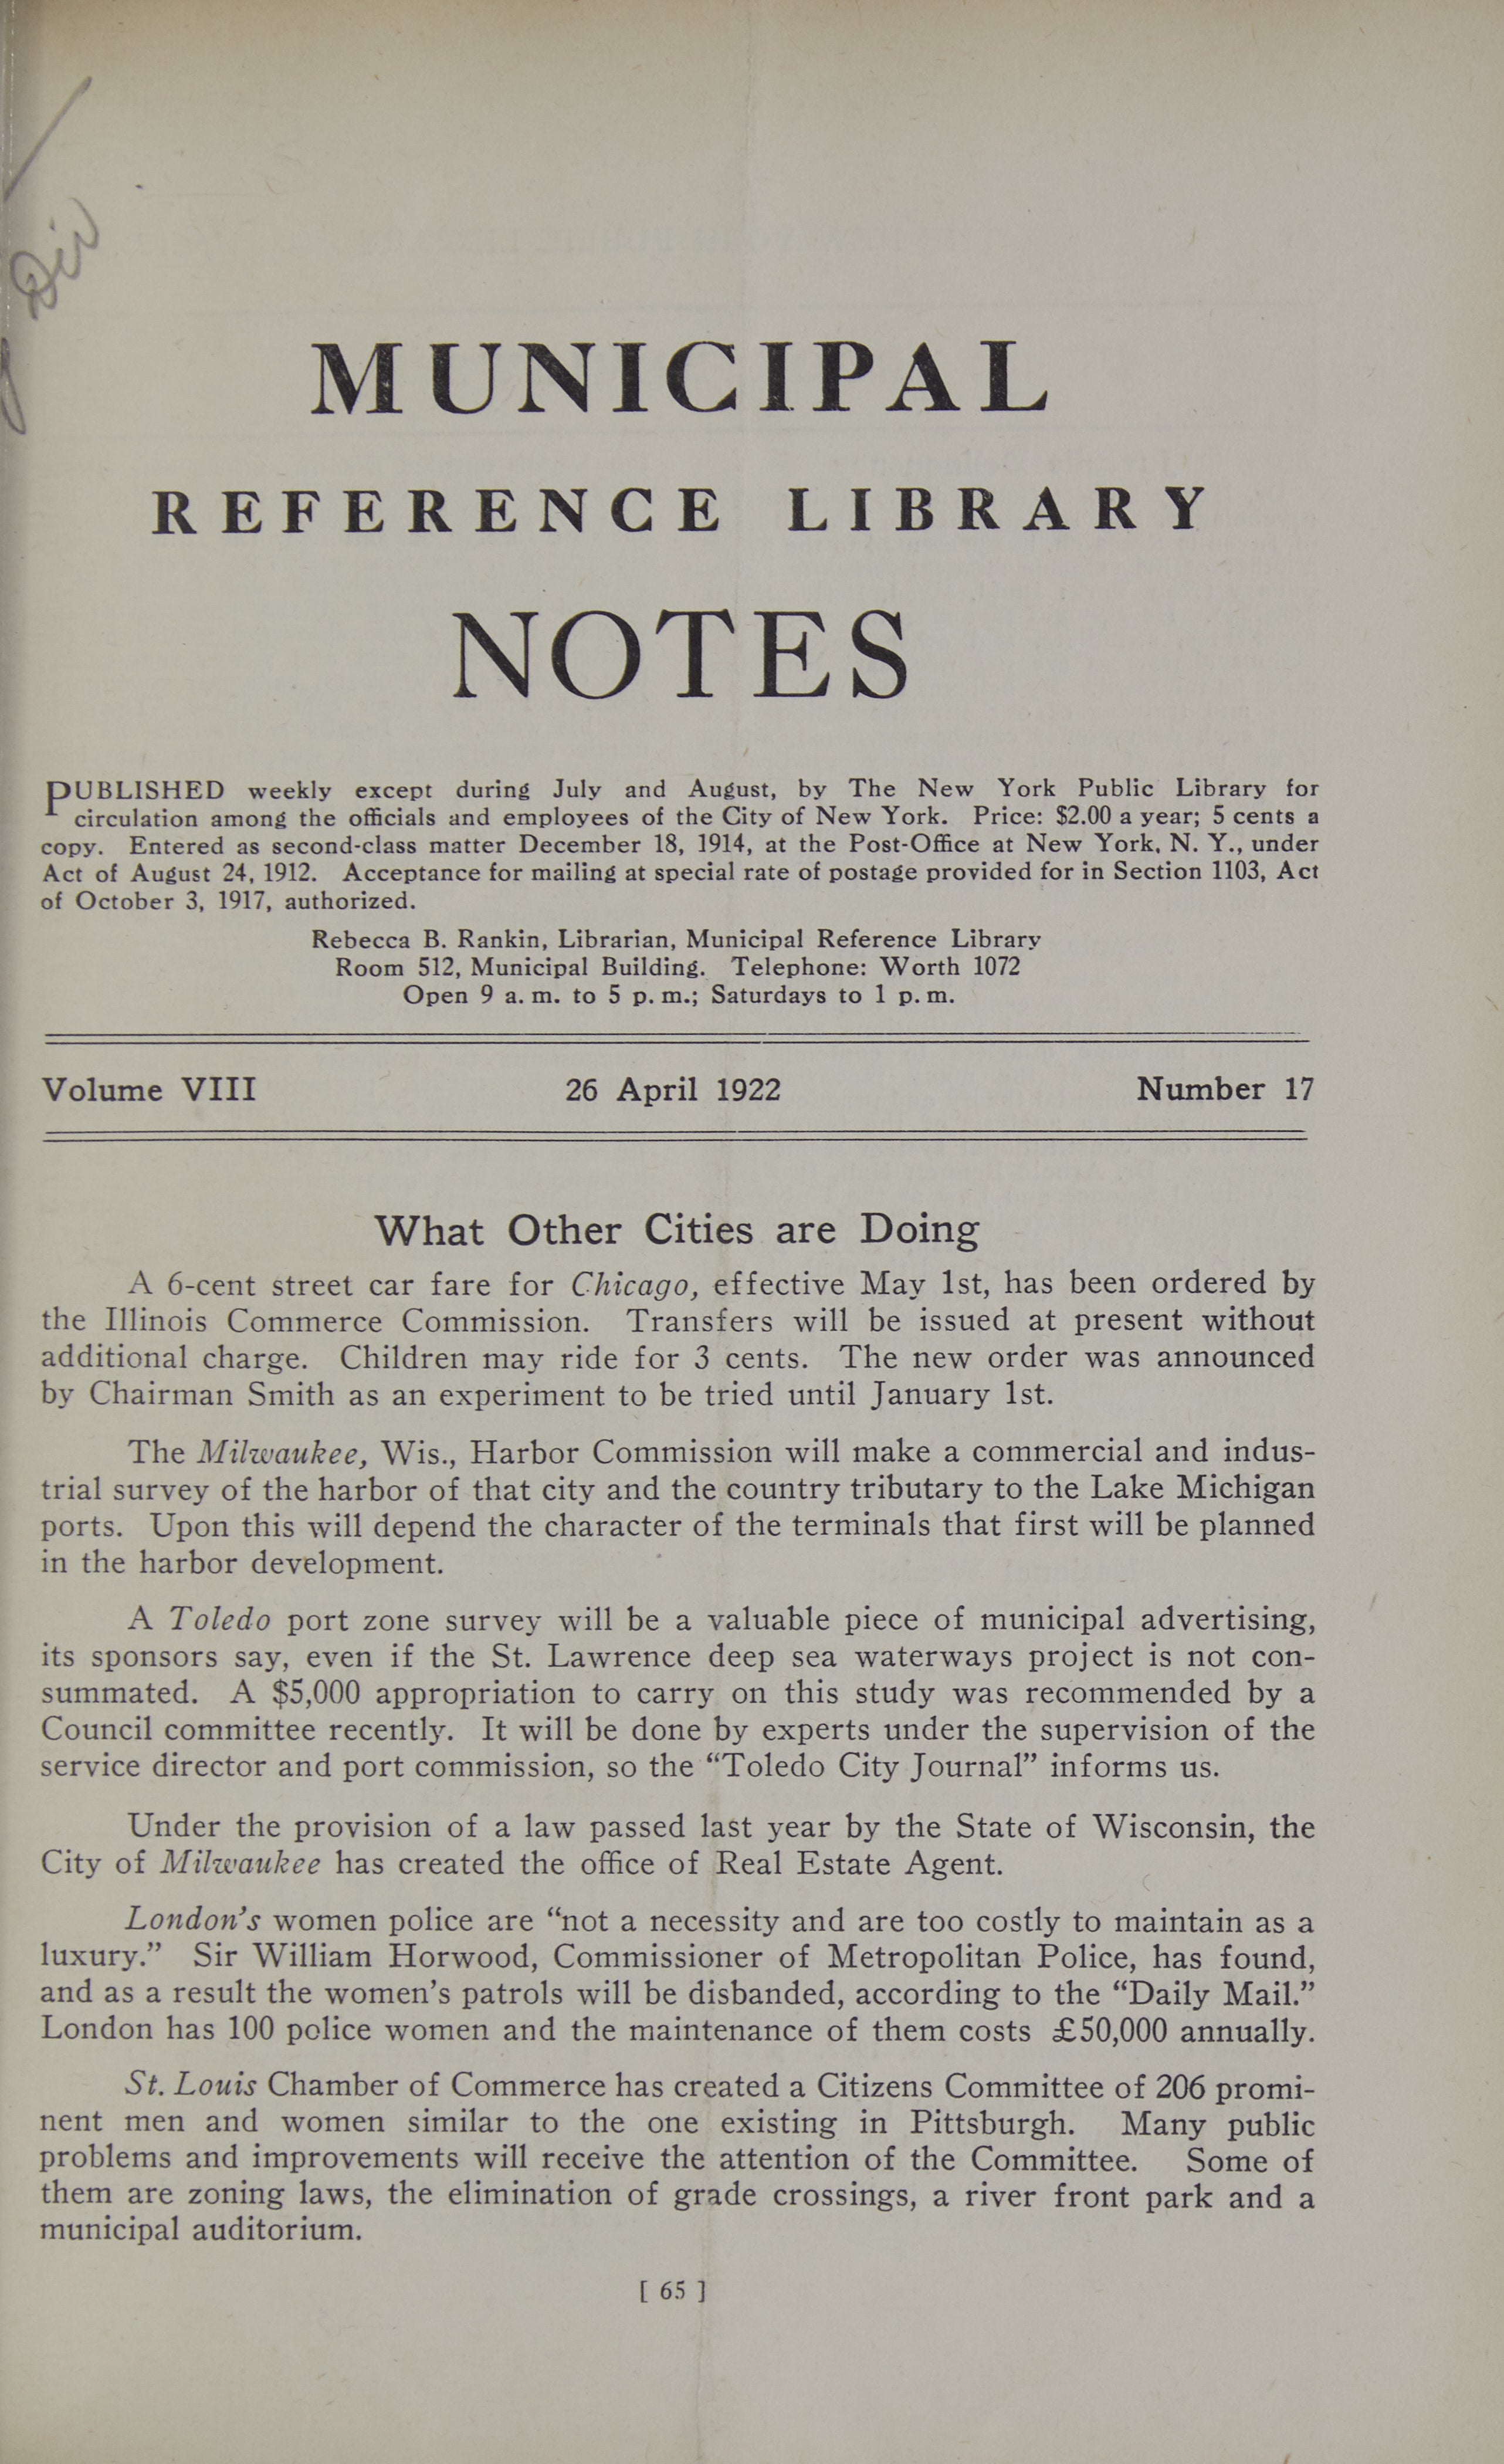 Reprint of the title page for the article What Other Cities are Doing